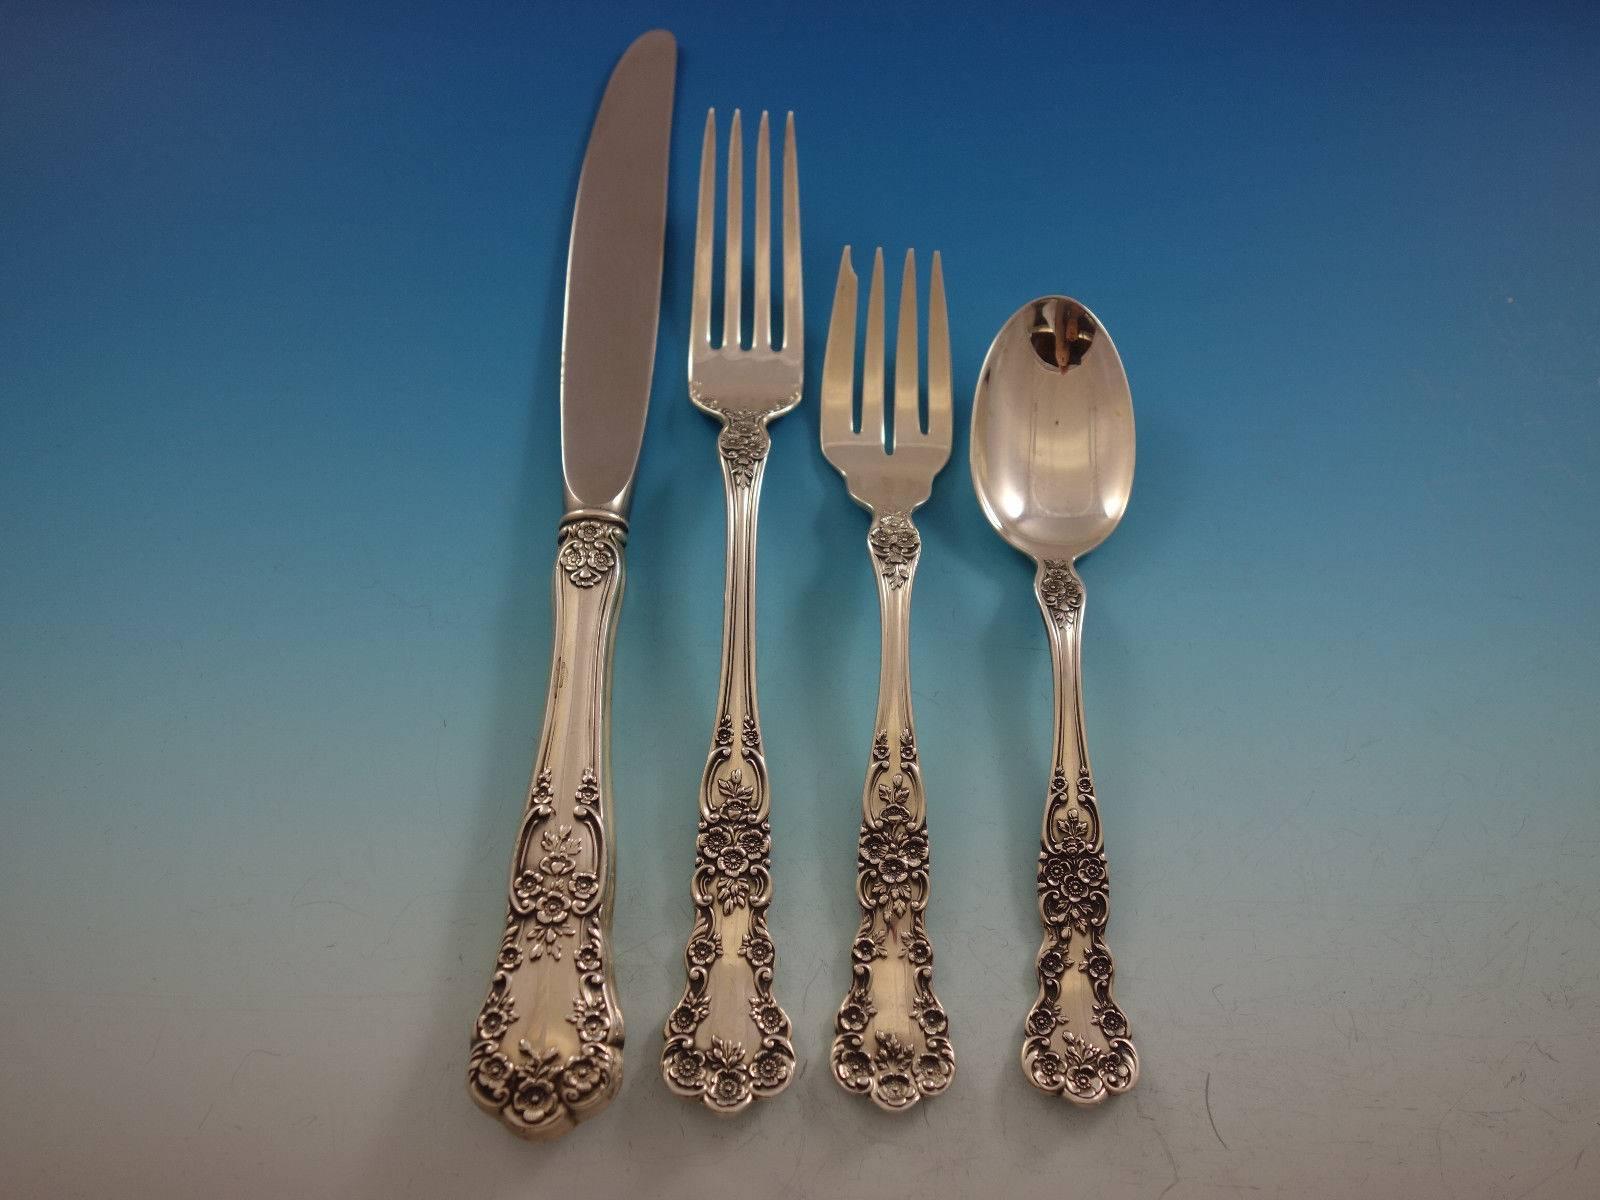 Monumental place size Buttercup by Gorham sterling silver flatware set - 113 pieces. This set includes: 

12 place size knives, 9